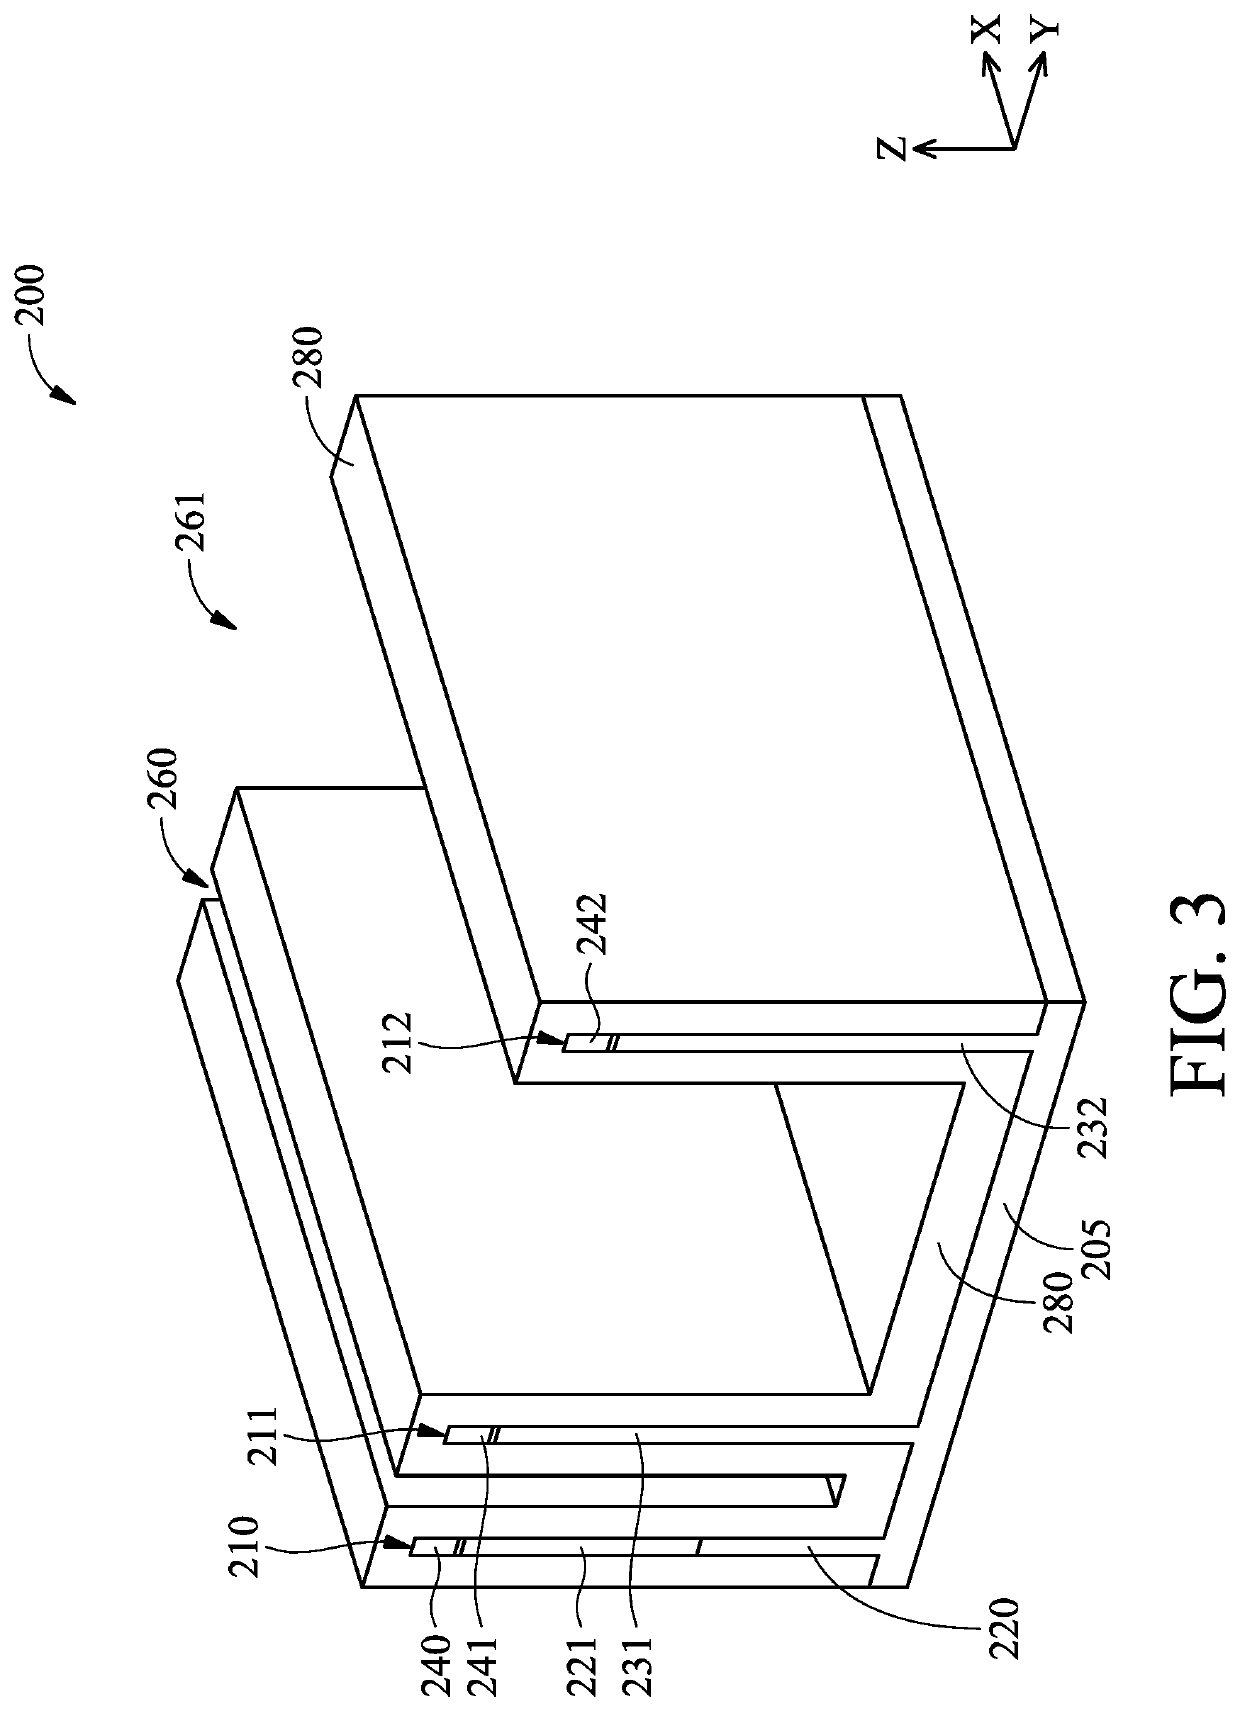 Dummy dielectric fin design for parasitic capacitance reduction